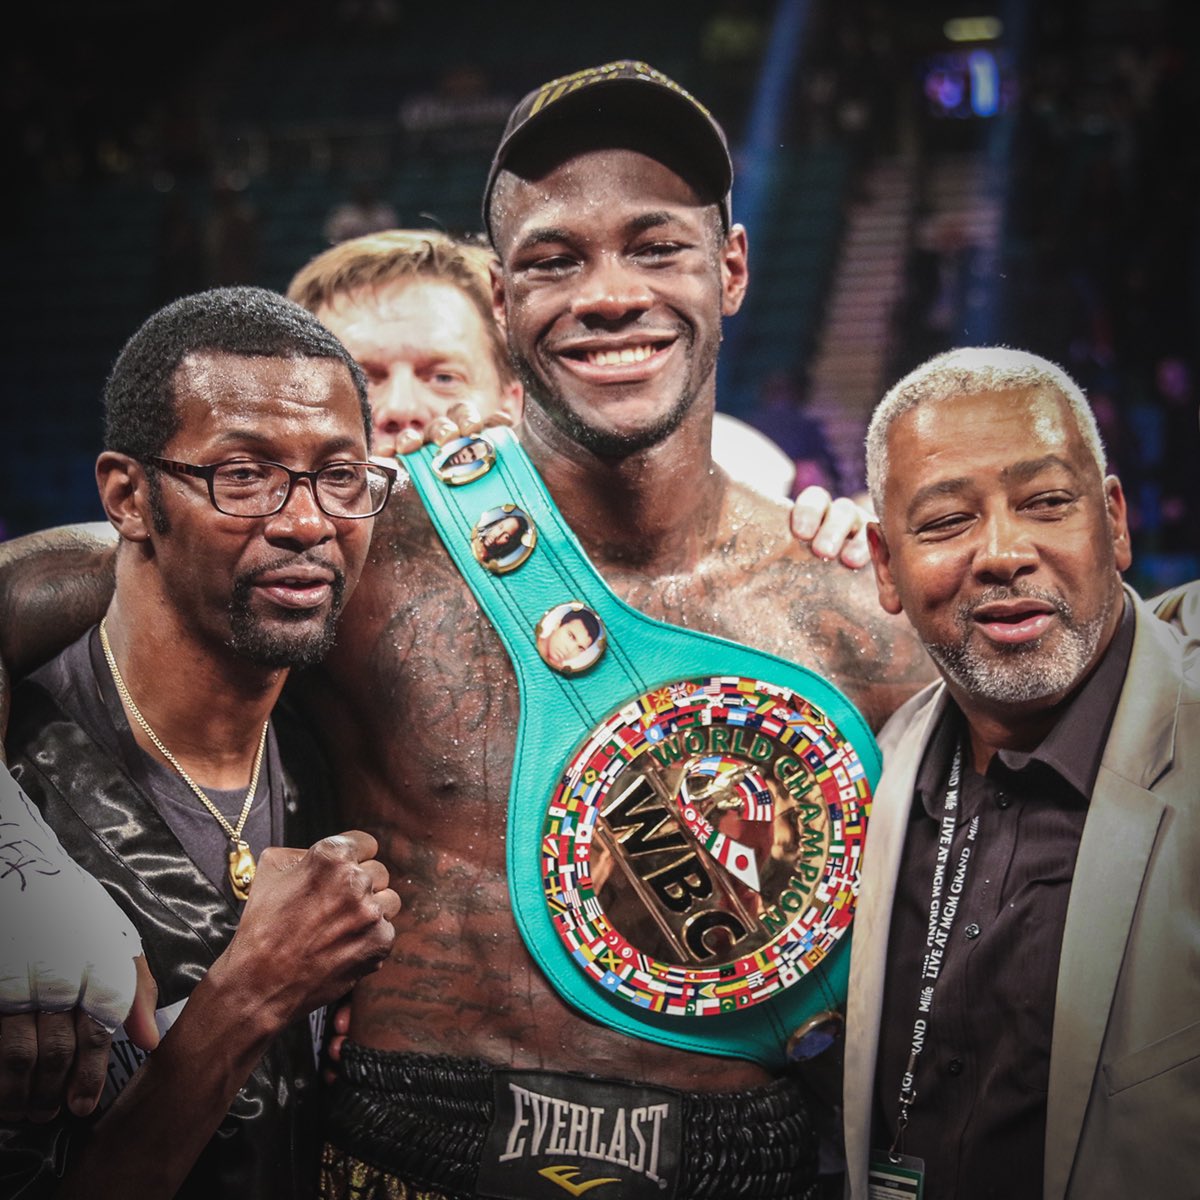 mærkelig Rationalisering blanding BREAKING NEWS: WBC World Heavyweight Champion Deontay Wilder ordered to  defend WBC heavyweight title against Dominic Breazeale - Daily Active